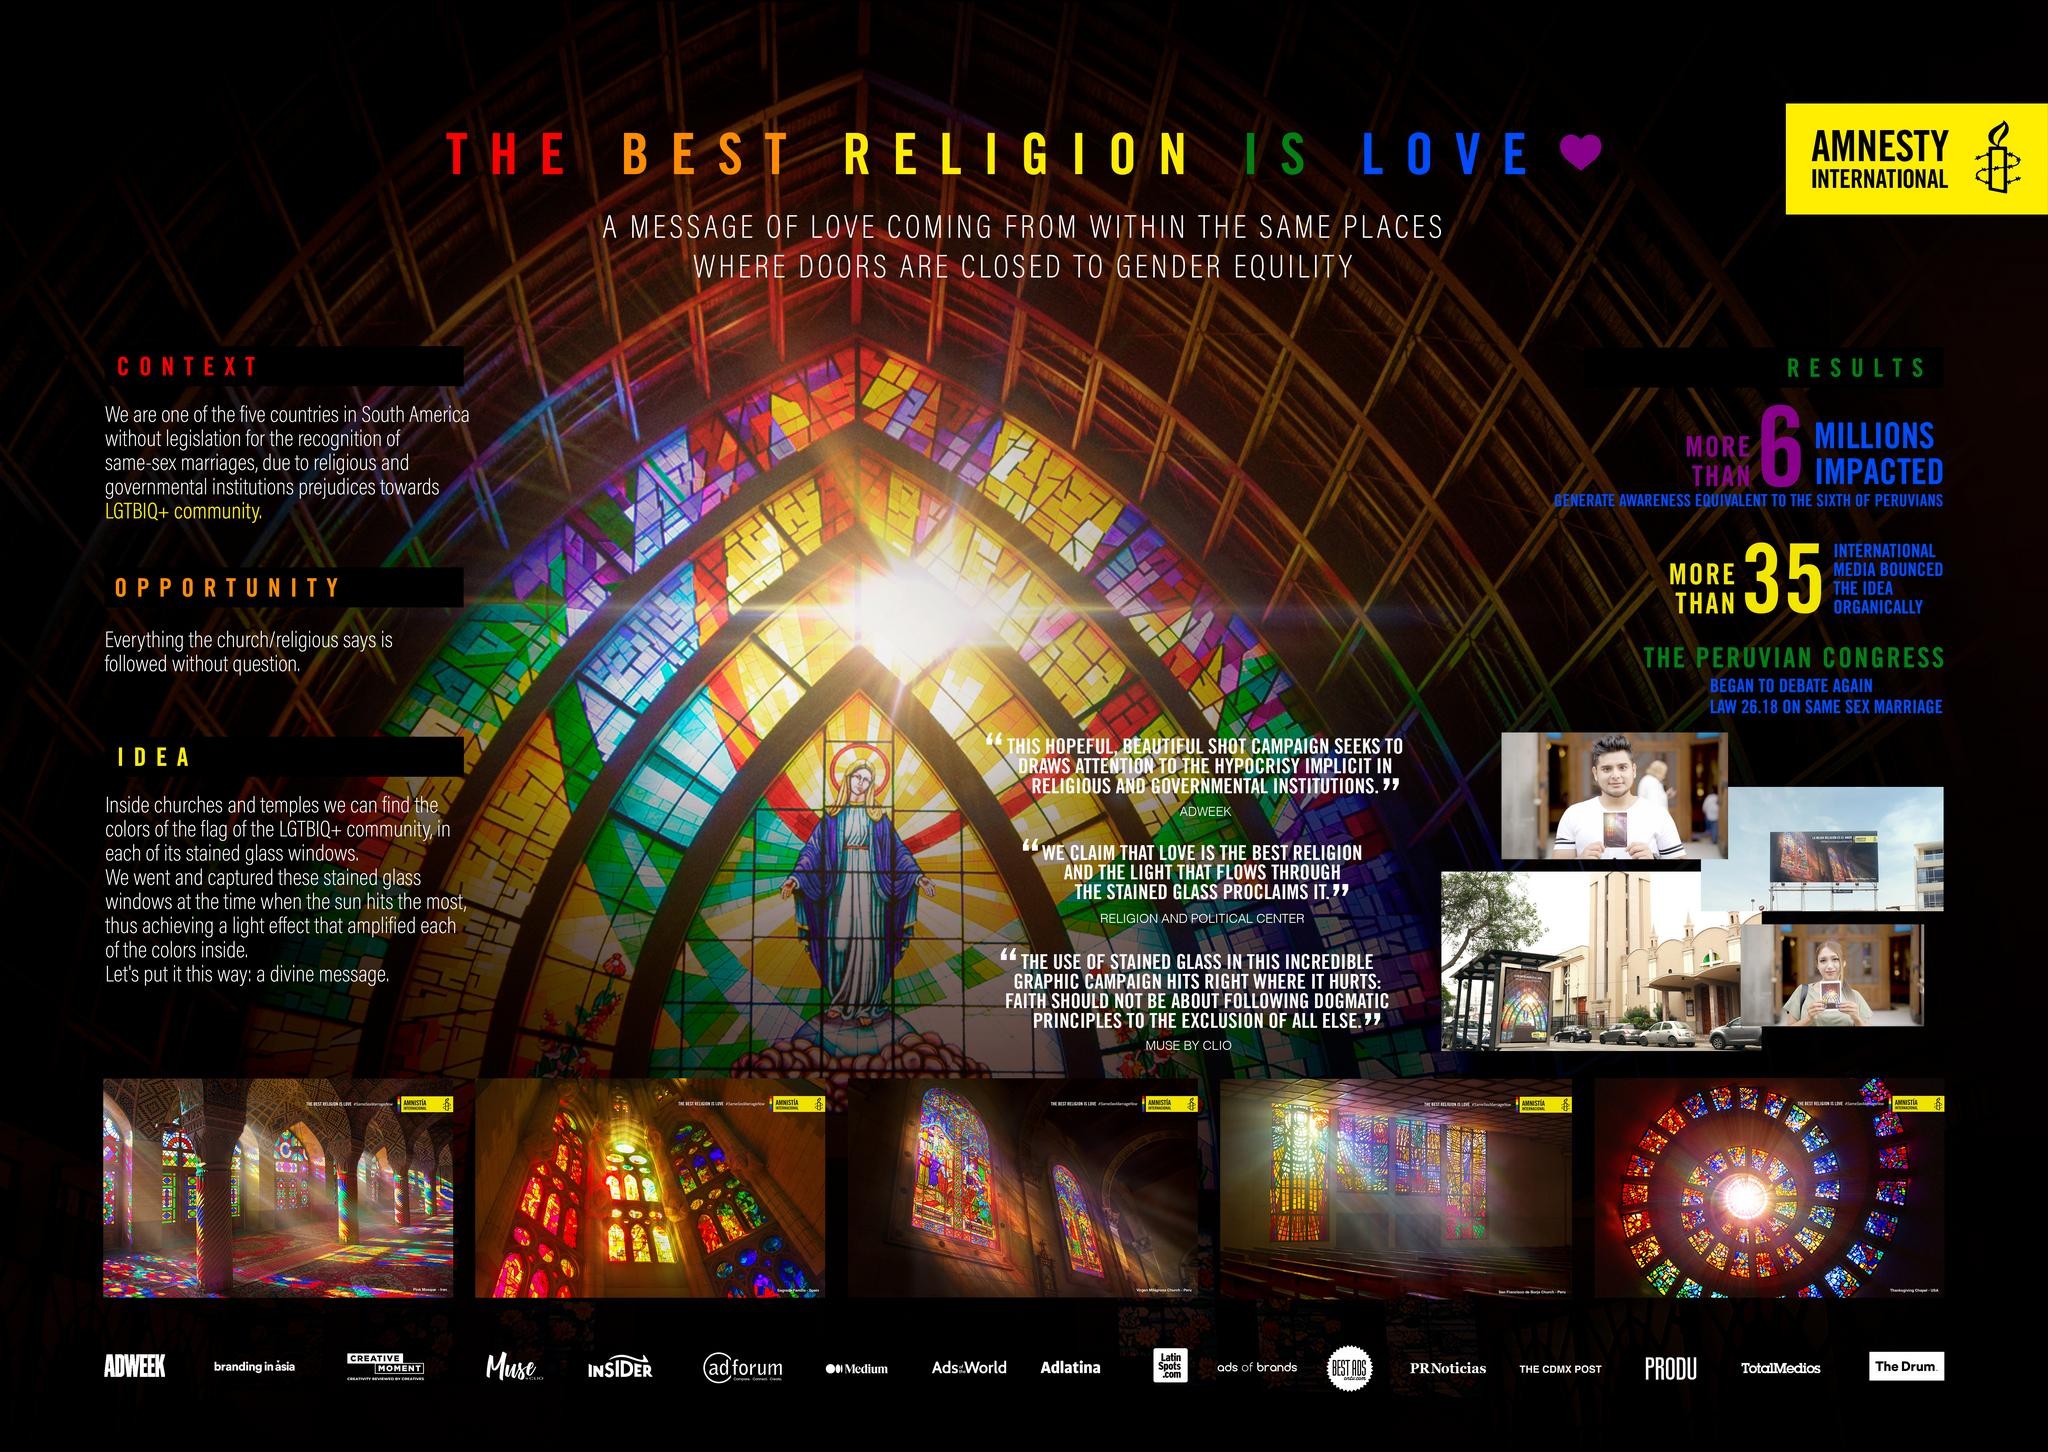 The Best Religion is Love